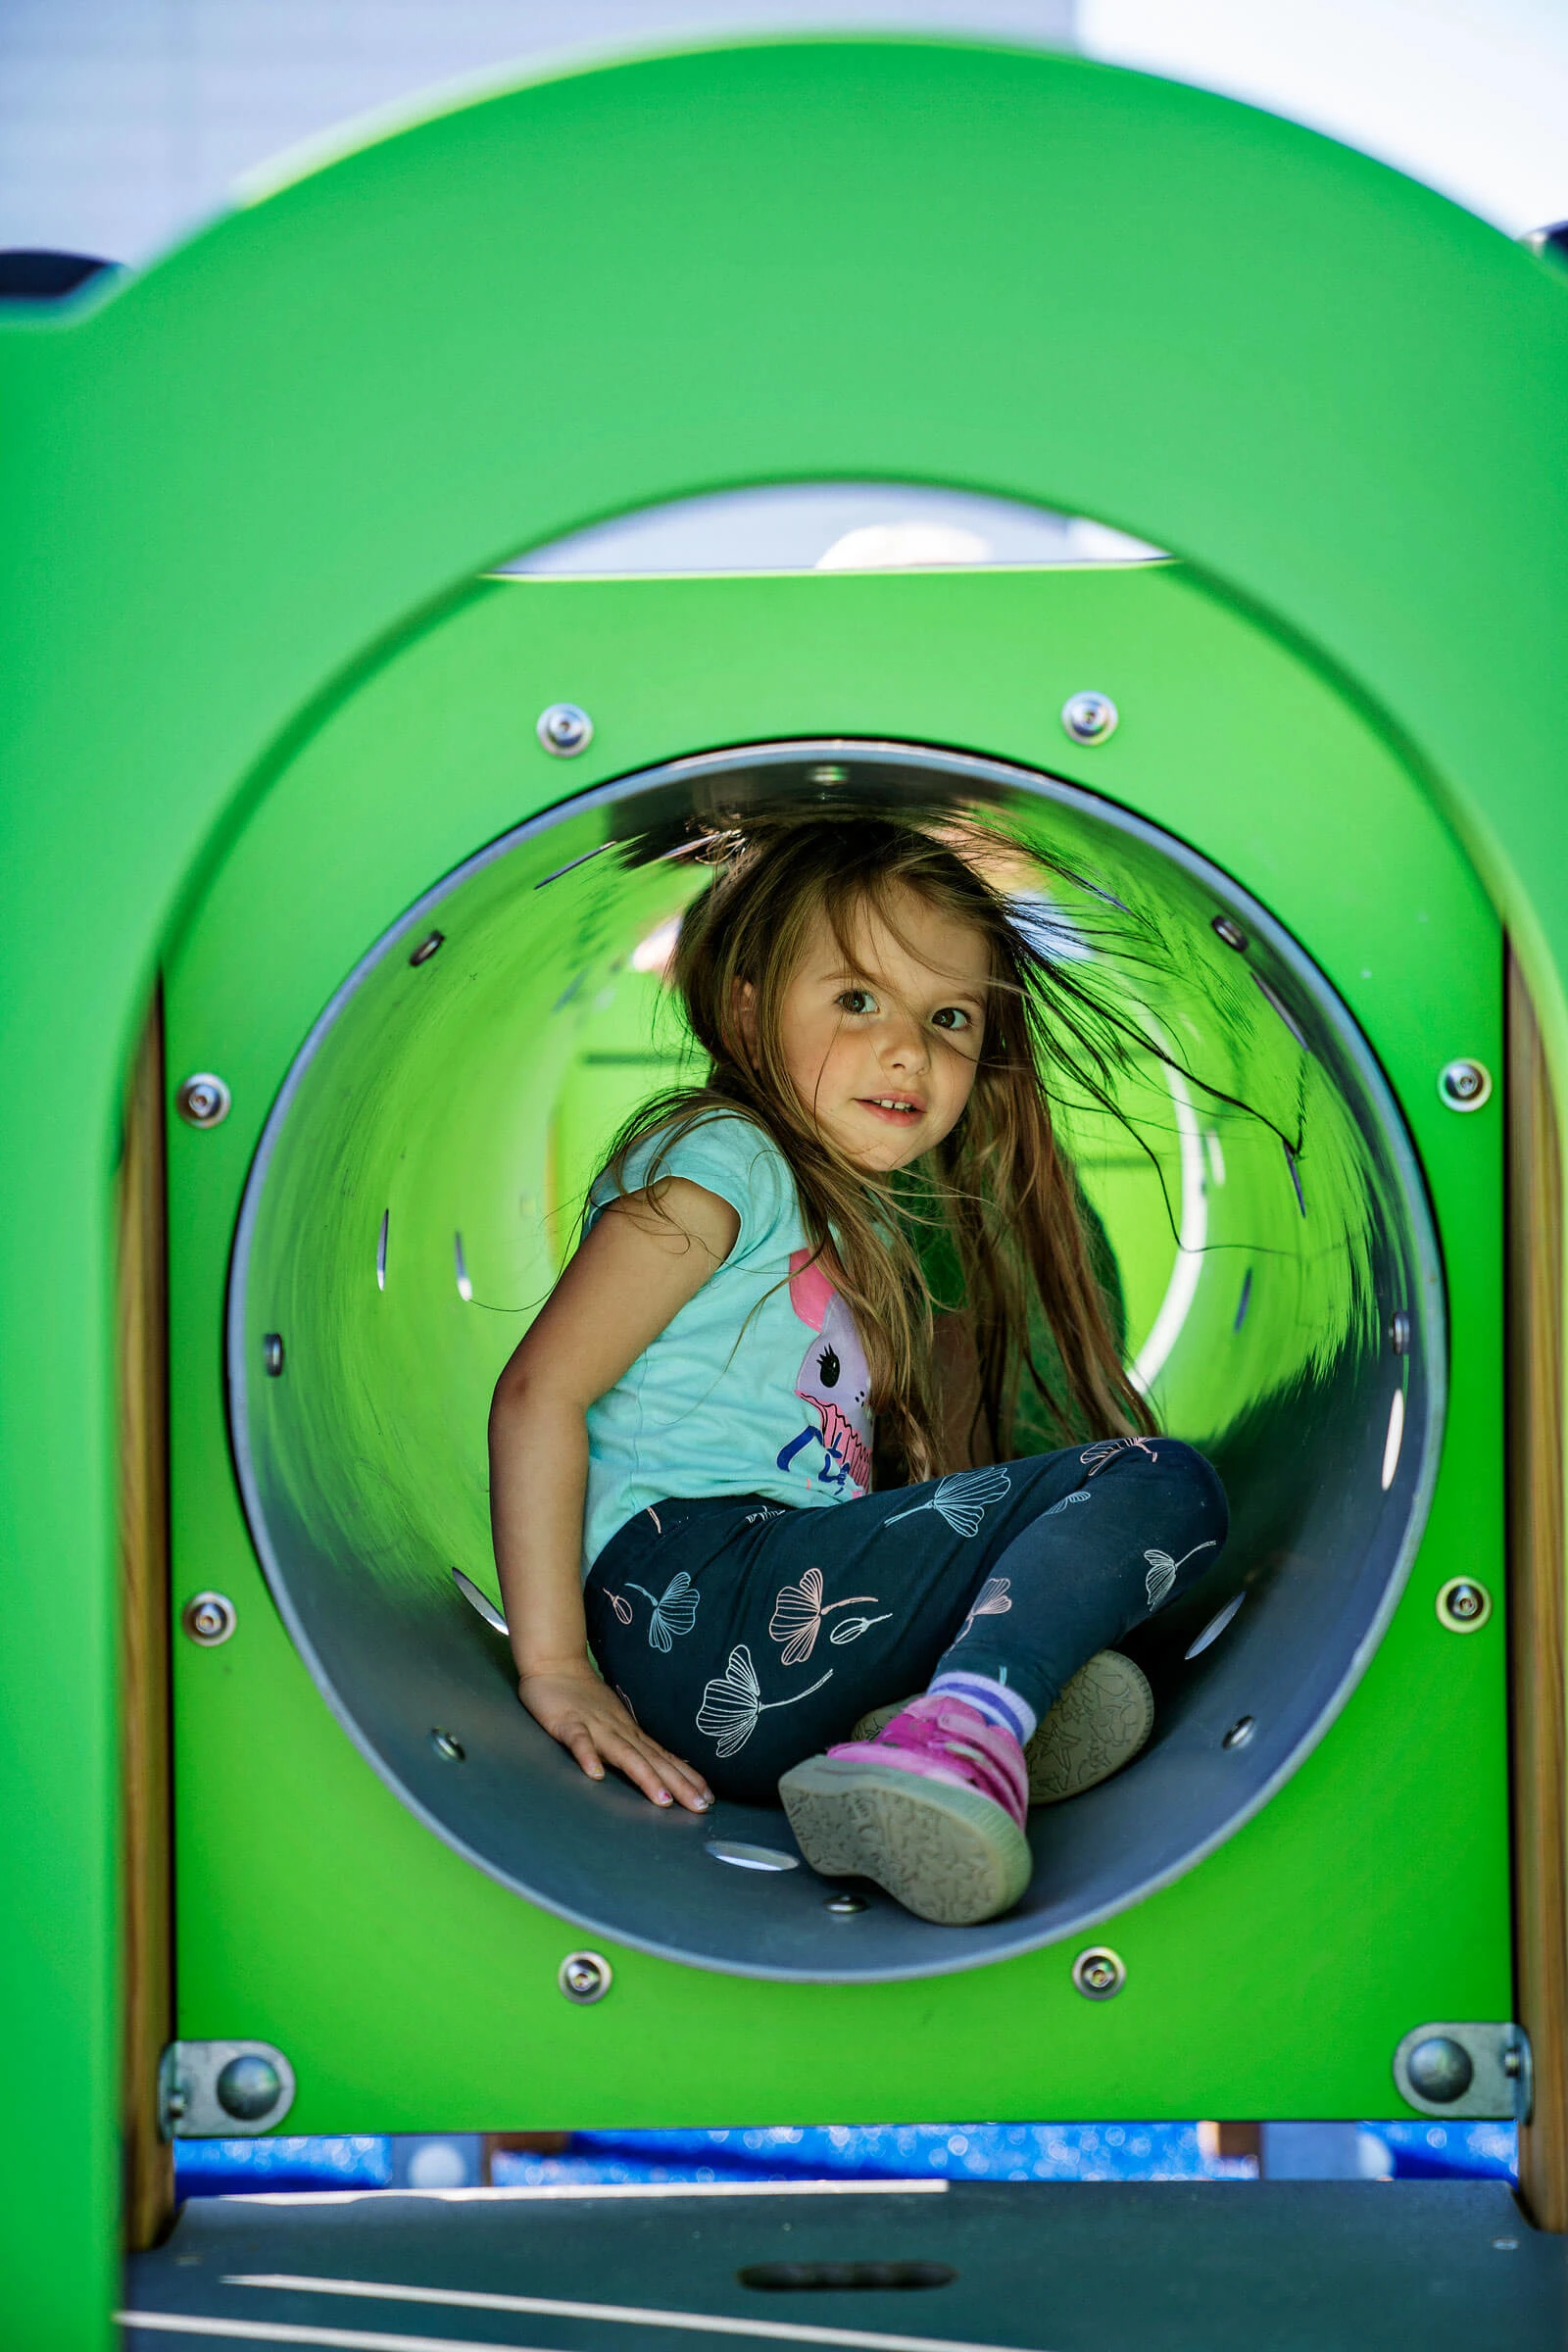 school girl sitting in a tube on a play structure for primary schools